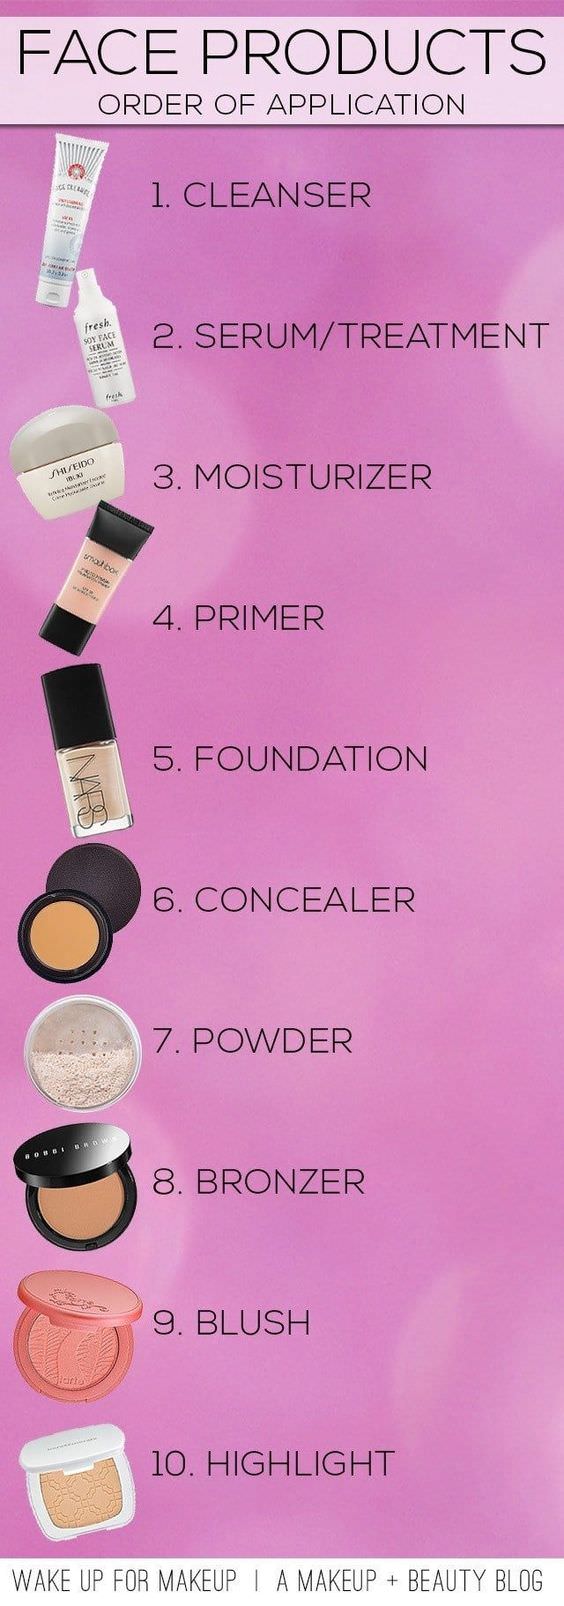 27 Tips And Tricks For Getting Your Makeup To Look The Best It Ever Has Fashion Daily